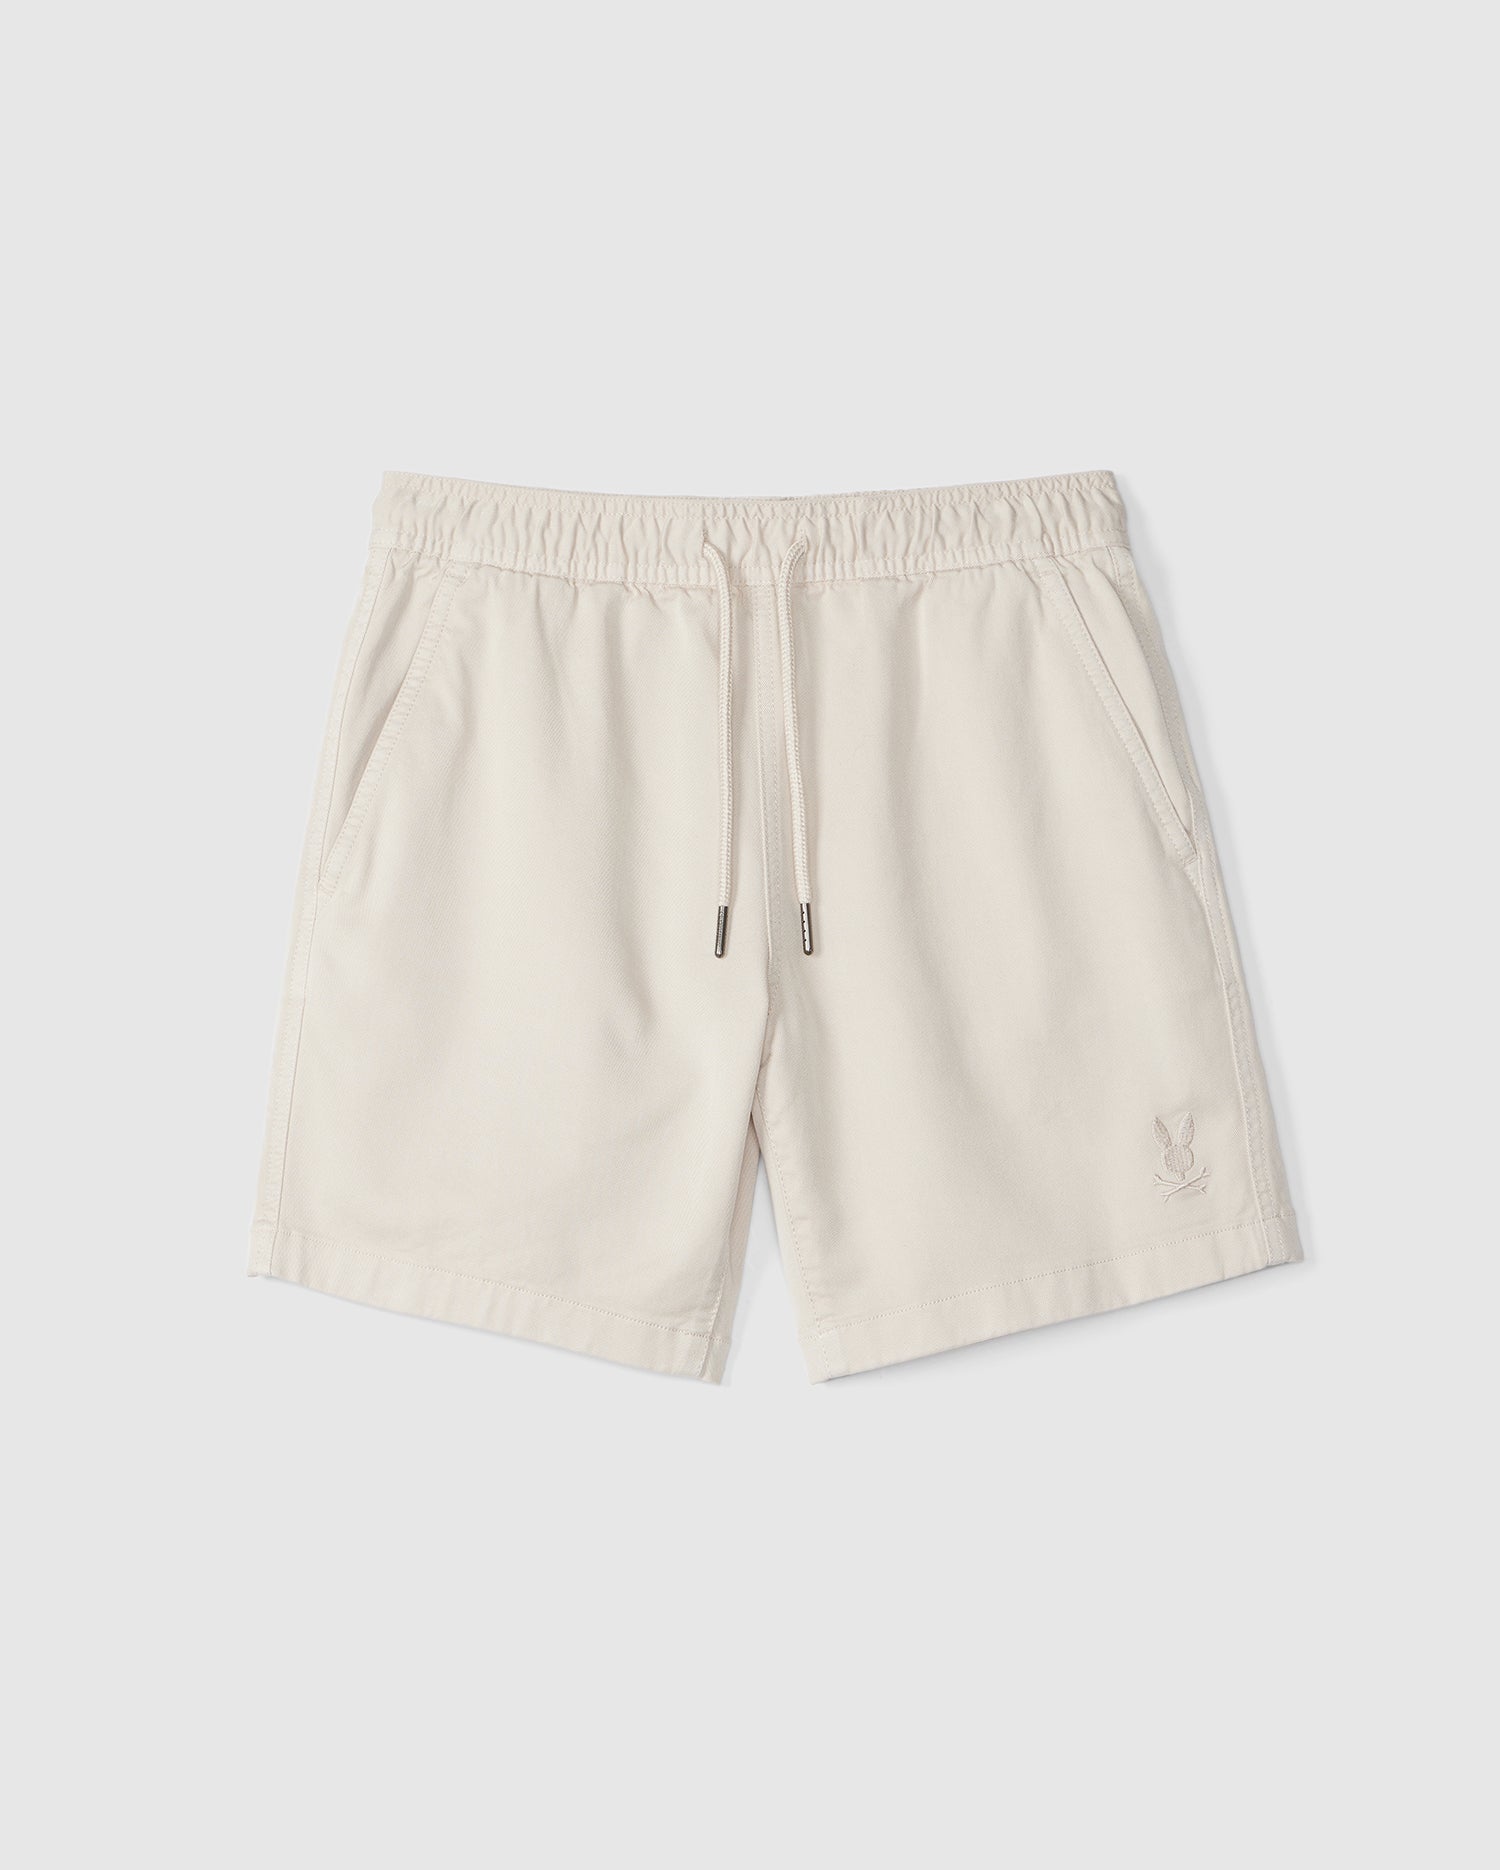 A pair of beige men's KIDS WILLIS STRETCH TENCEL shorts made by Psycho Bunny, with an elastic waistband and drawstrings, featuring a small embroidered logo near the bottom left hem, displayed on a plain white background.